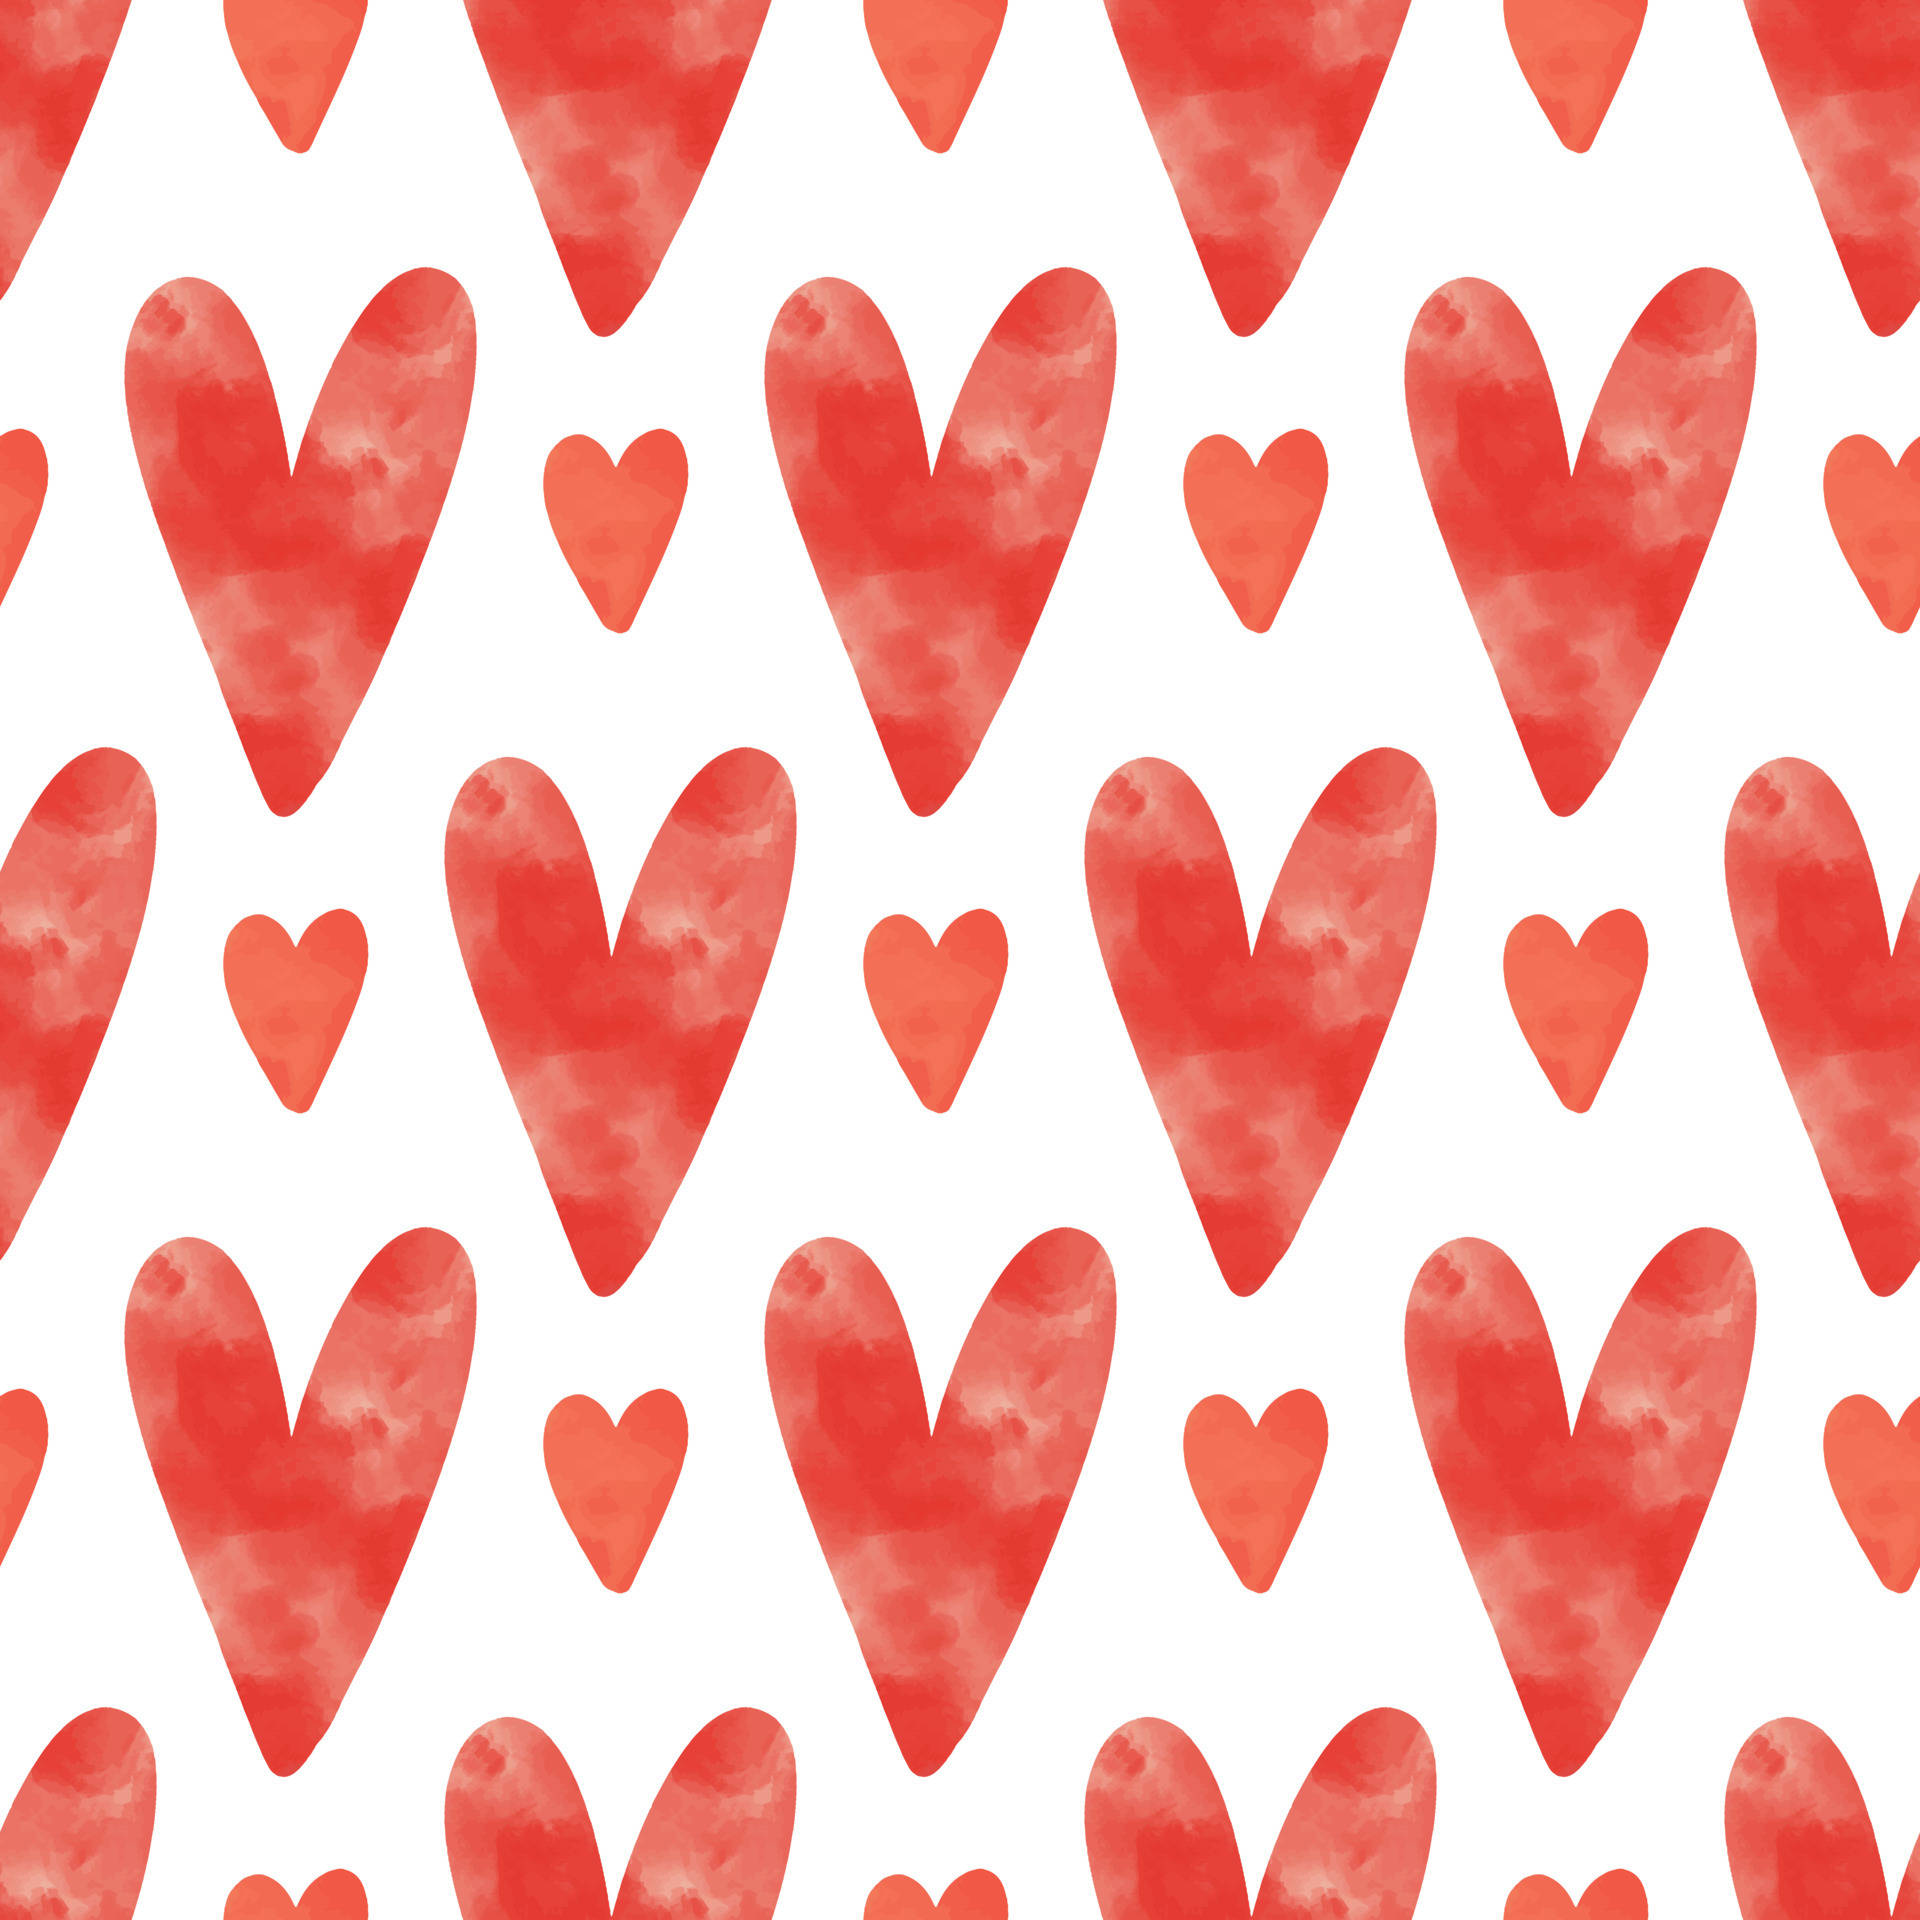 Download Red Hearts On White Background Wallpaper | Wallpapers.com